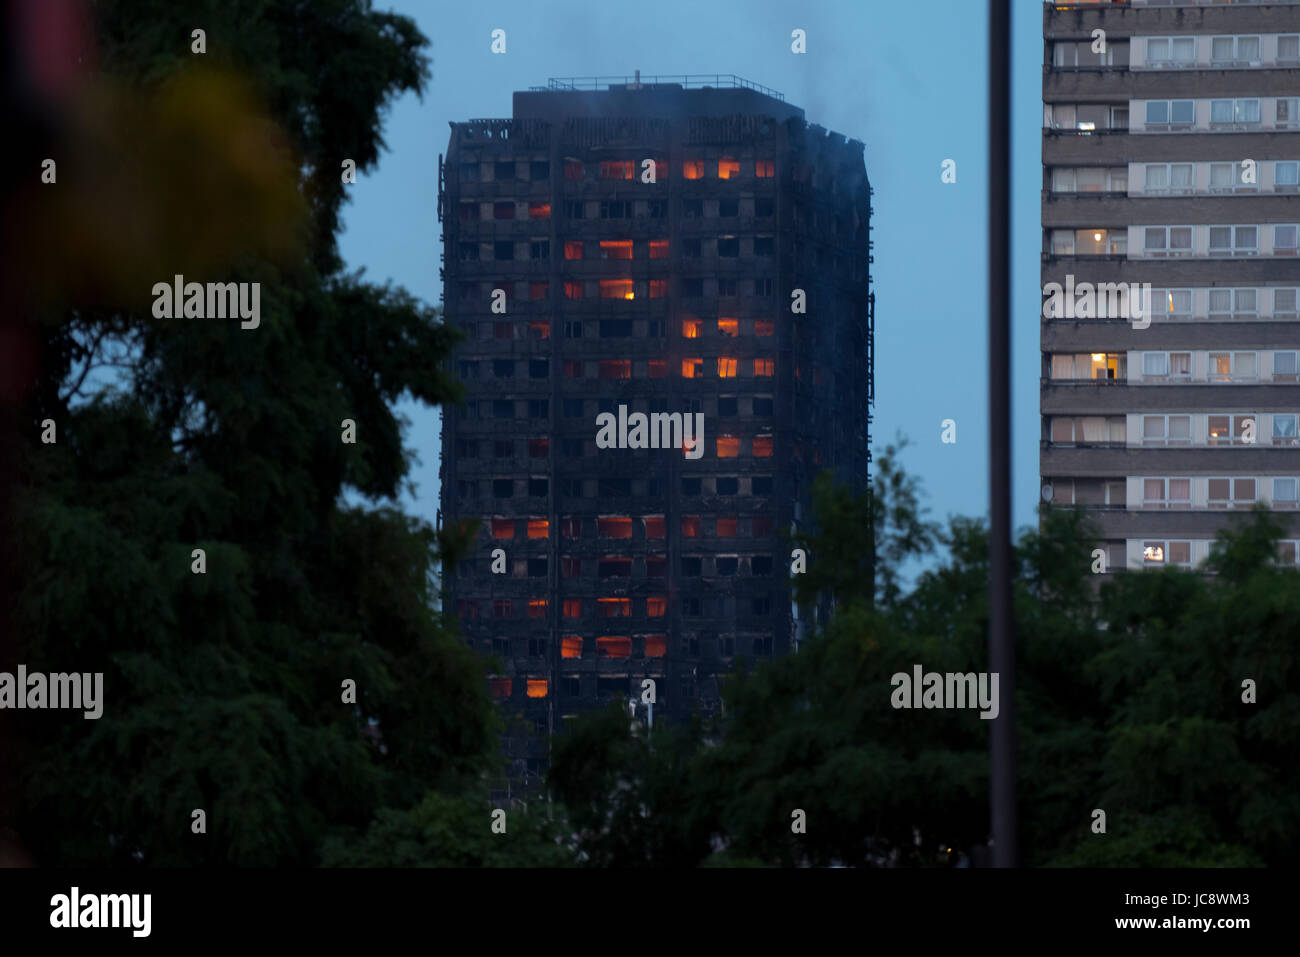 Grenfell Tower, London, UK. 14th Jun, 2017. 20:42 Still on fire Credit: ibeep Images/Alamy Live News Stock Photo